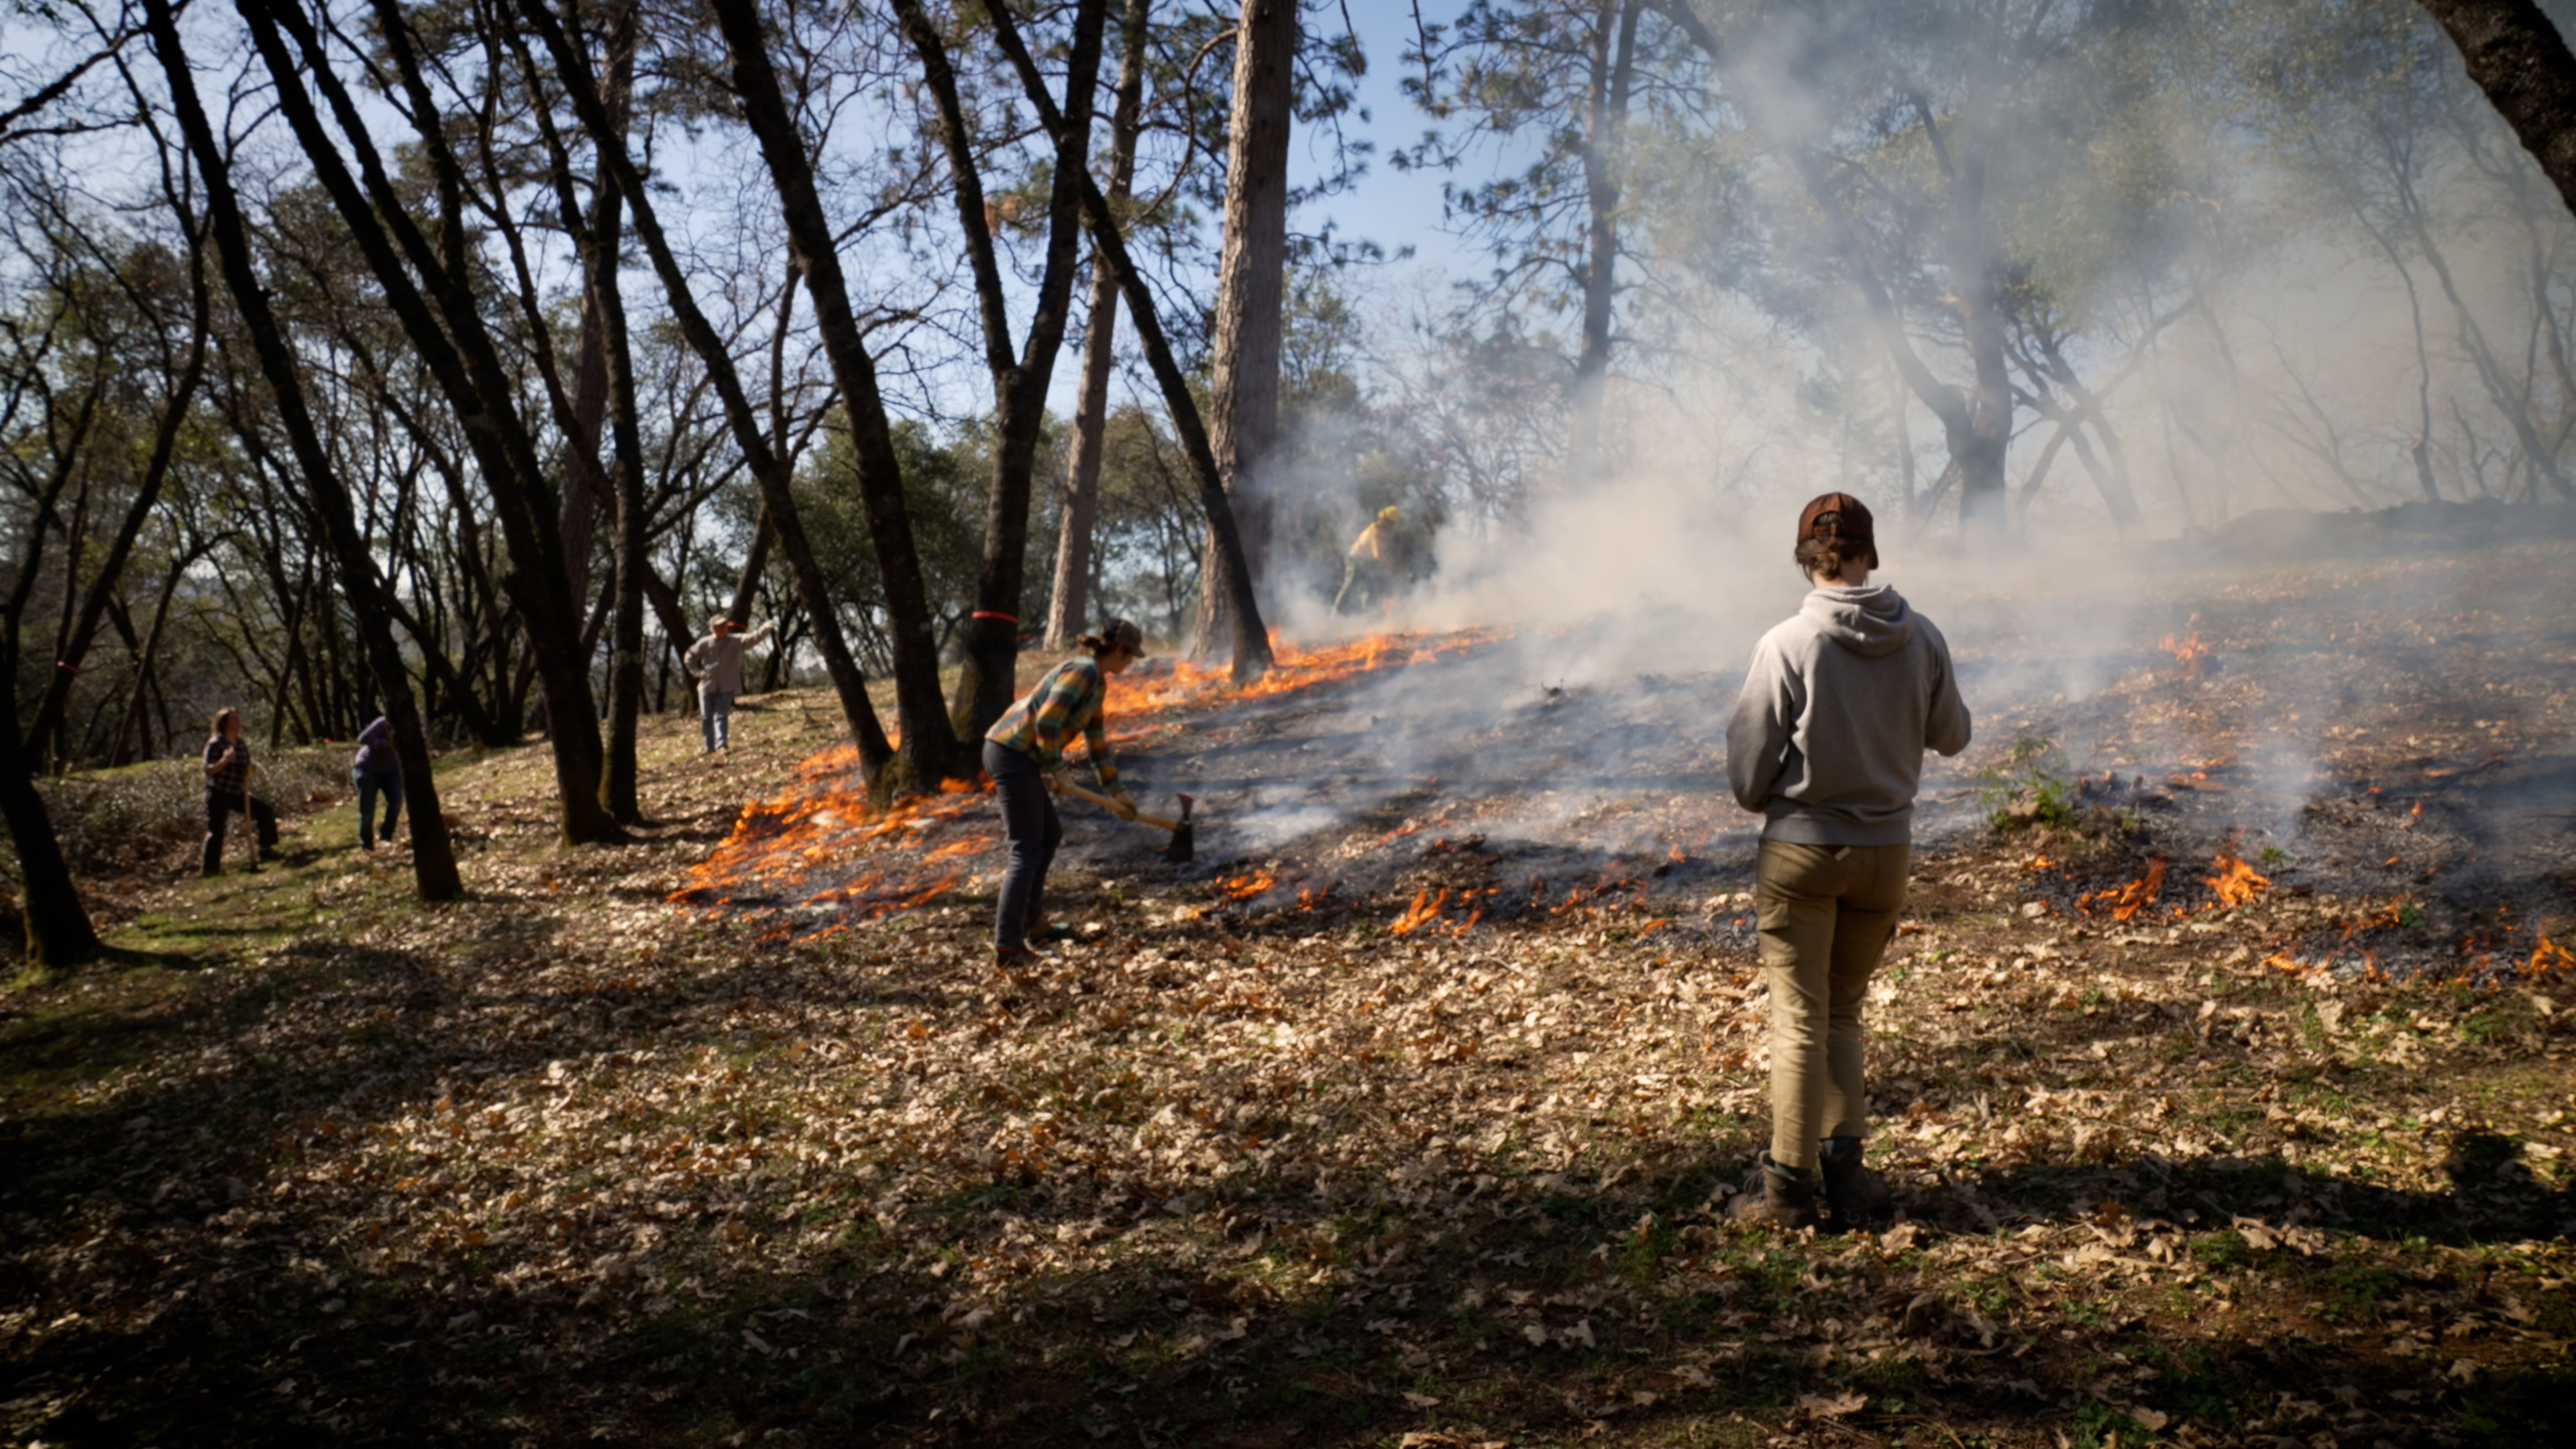 Community members, agency staffers and researchers work together to tend the fire. (Tim McConville/UC Davis)